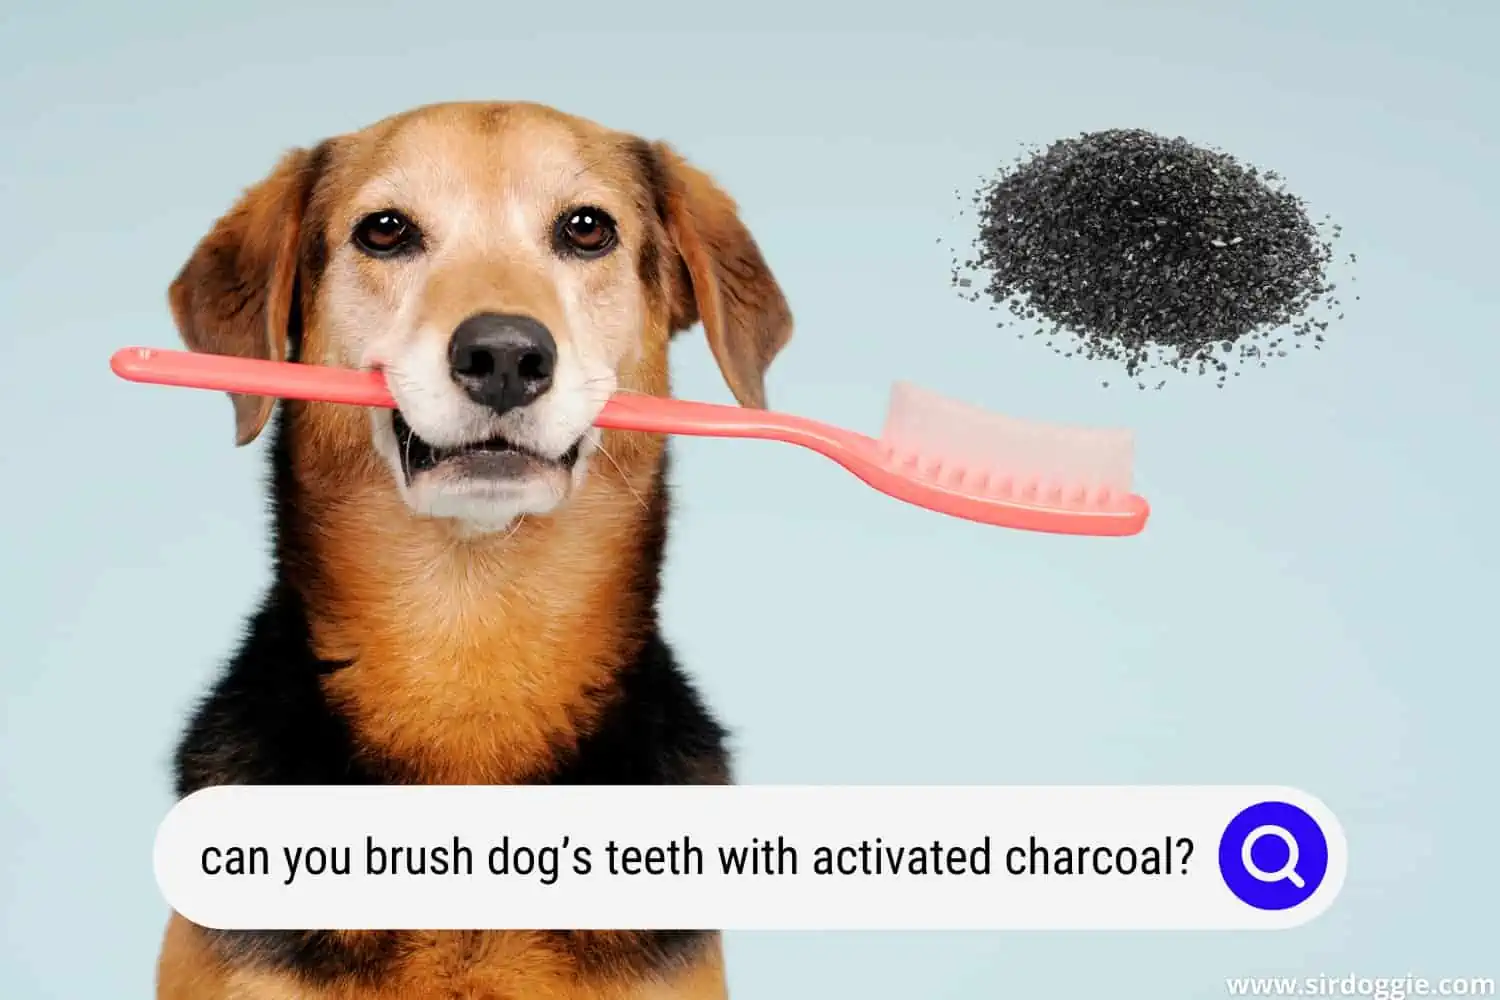 can you brush dog’s teeth with activated charcoal